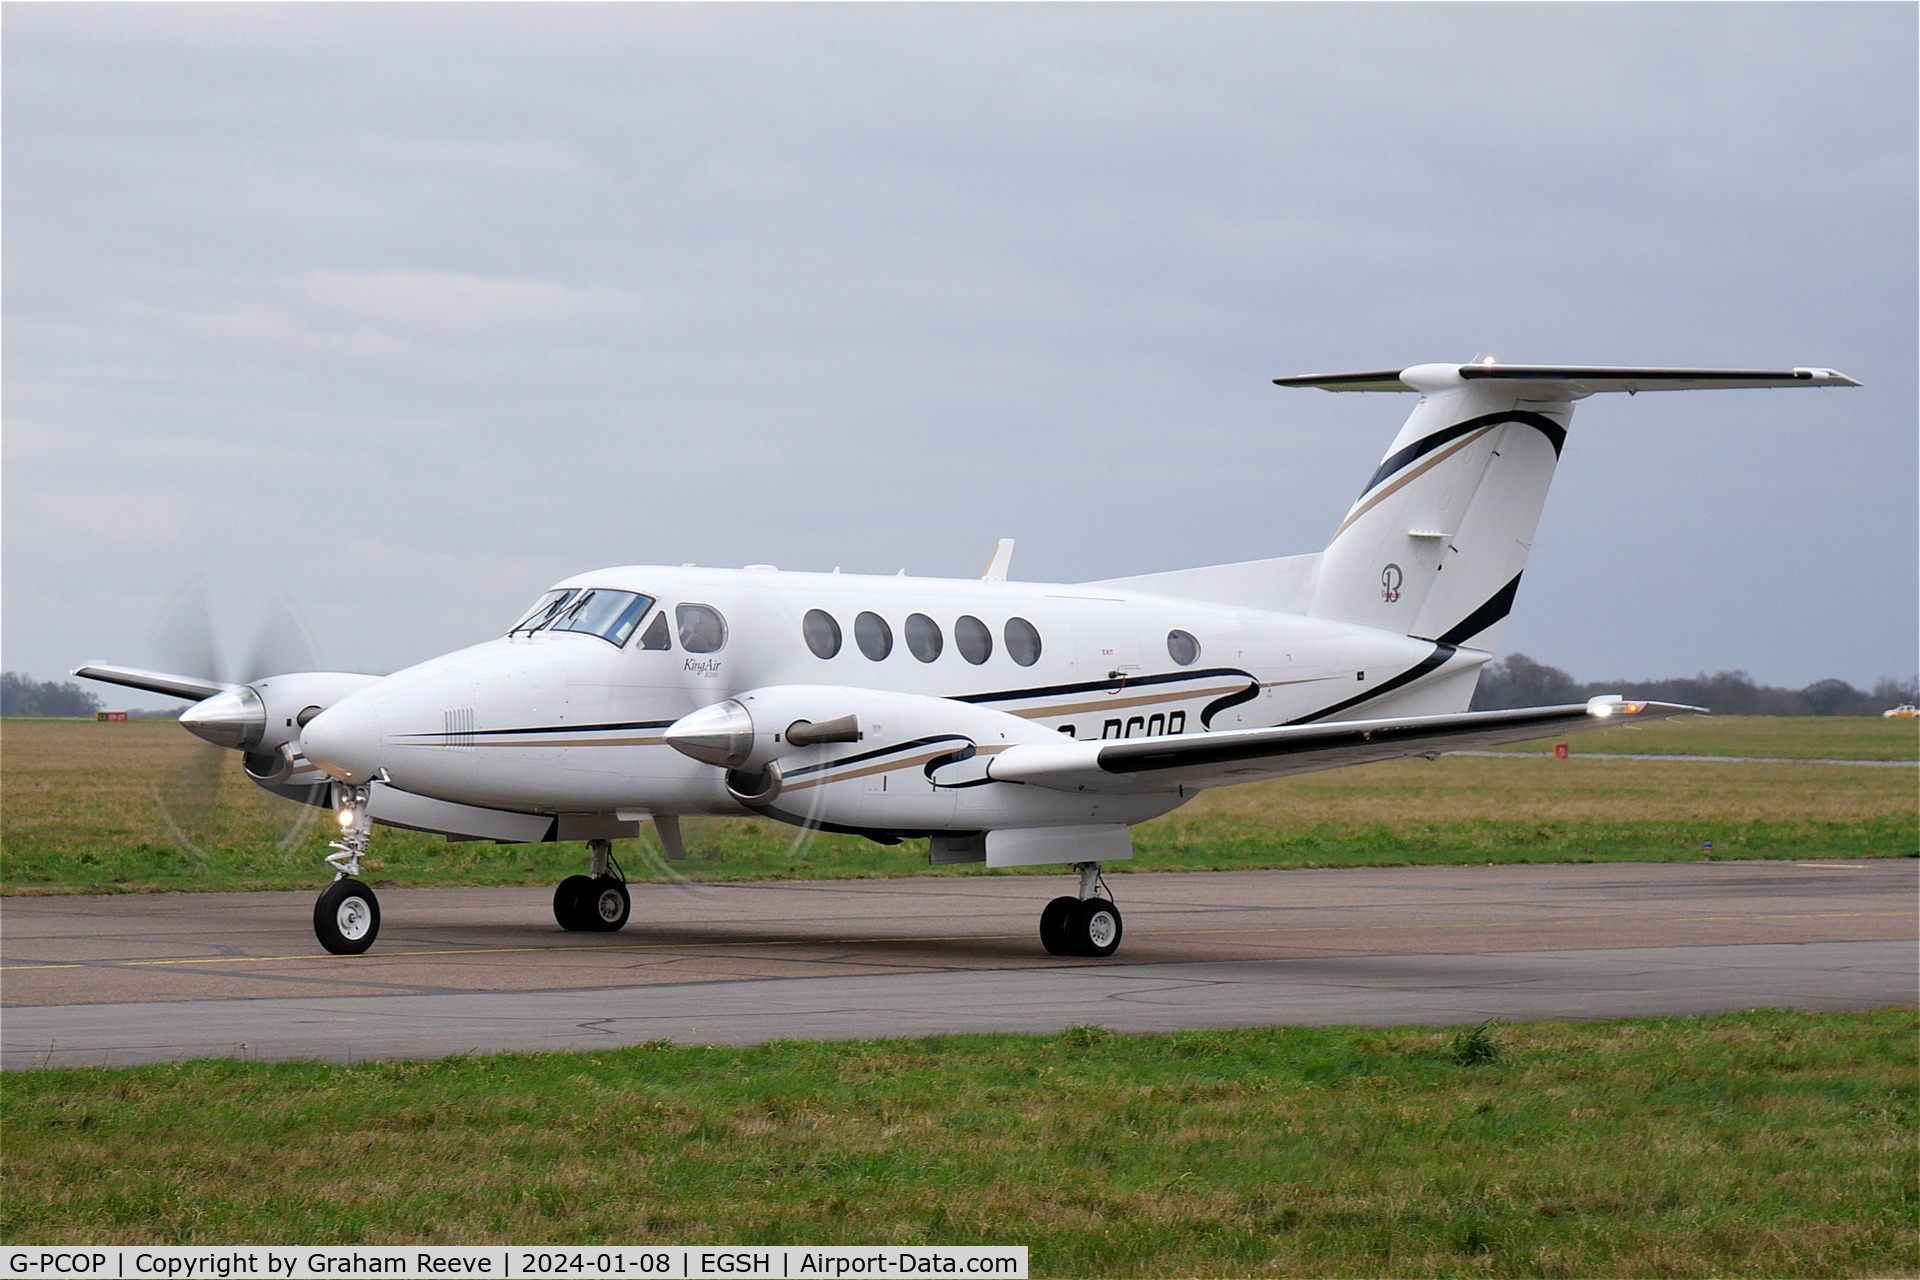 G-PCOP, 2004 Raytheon B200 King Air C/N BB-1860, Just landed at Norwich.